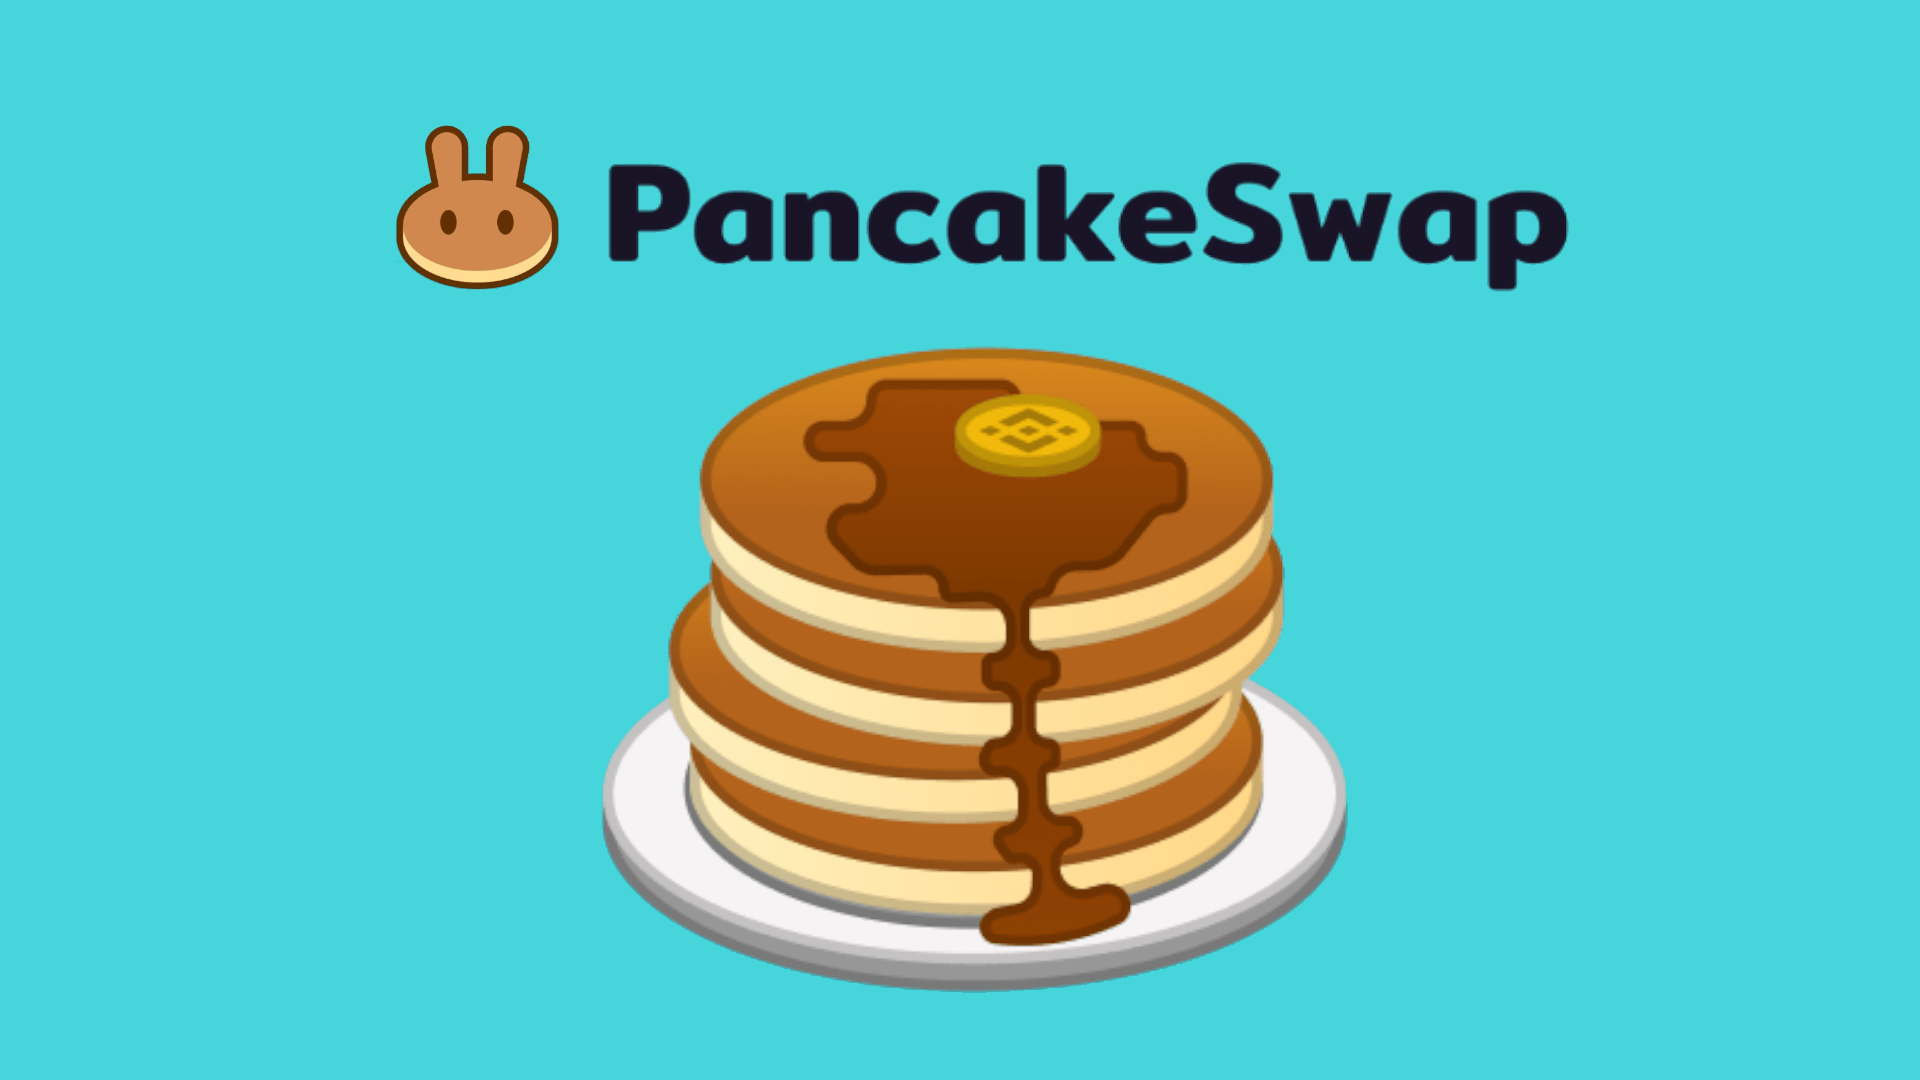 https://nftgames.net/wp-content/uploads/2022/08/PancakeSwap-rethinks-its-GameFi-plans-and-teases-multi-chain-development.png